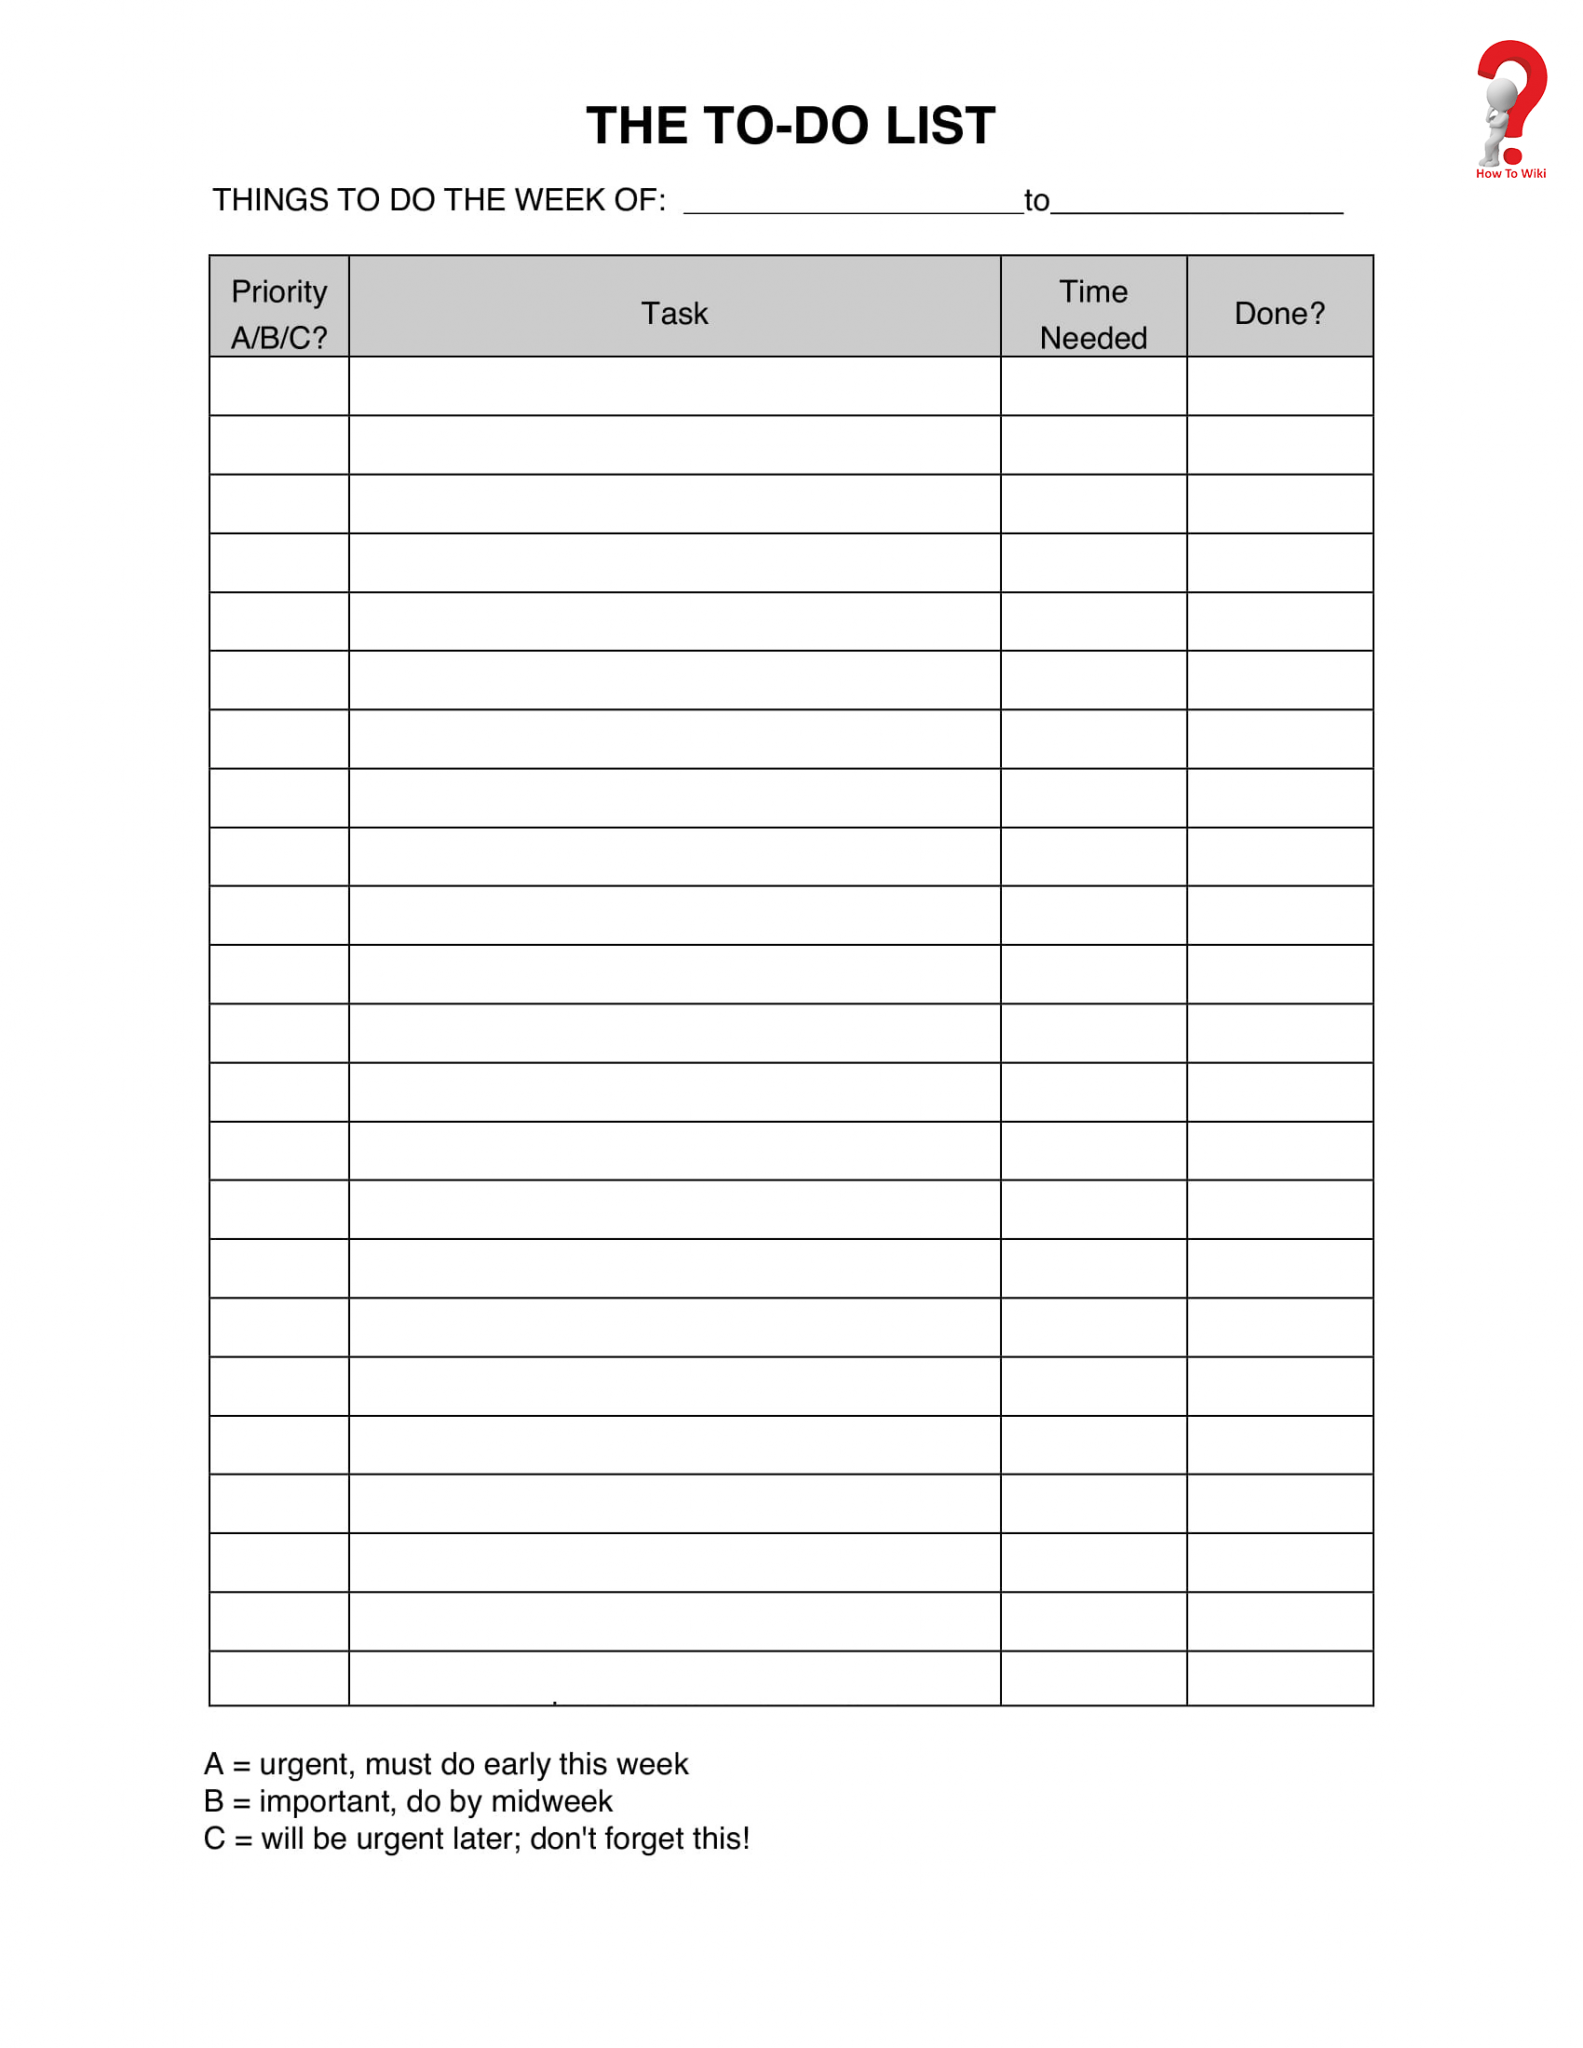 How To Schedule Your Week With Weekly To Do List Template | HowToWiki